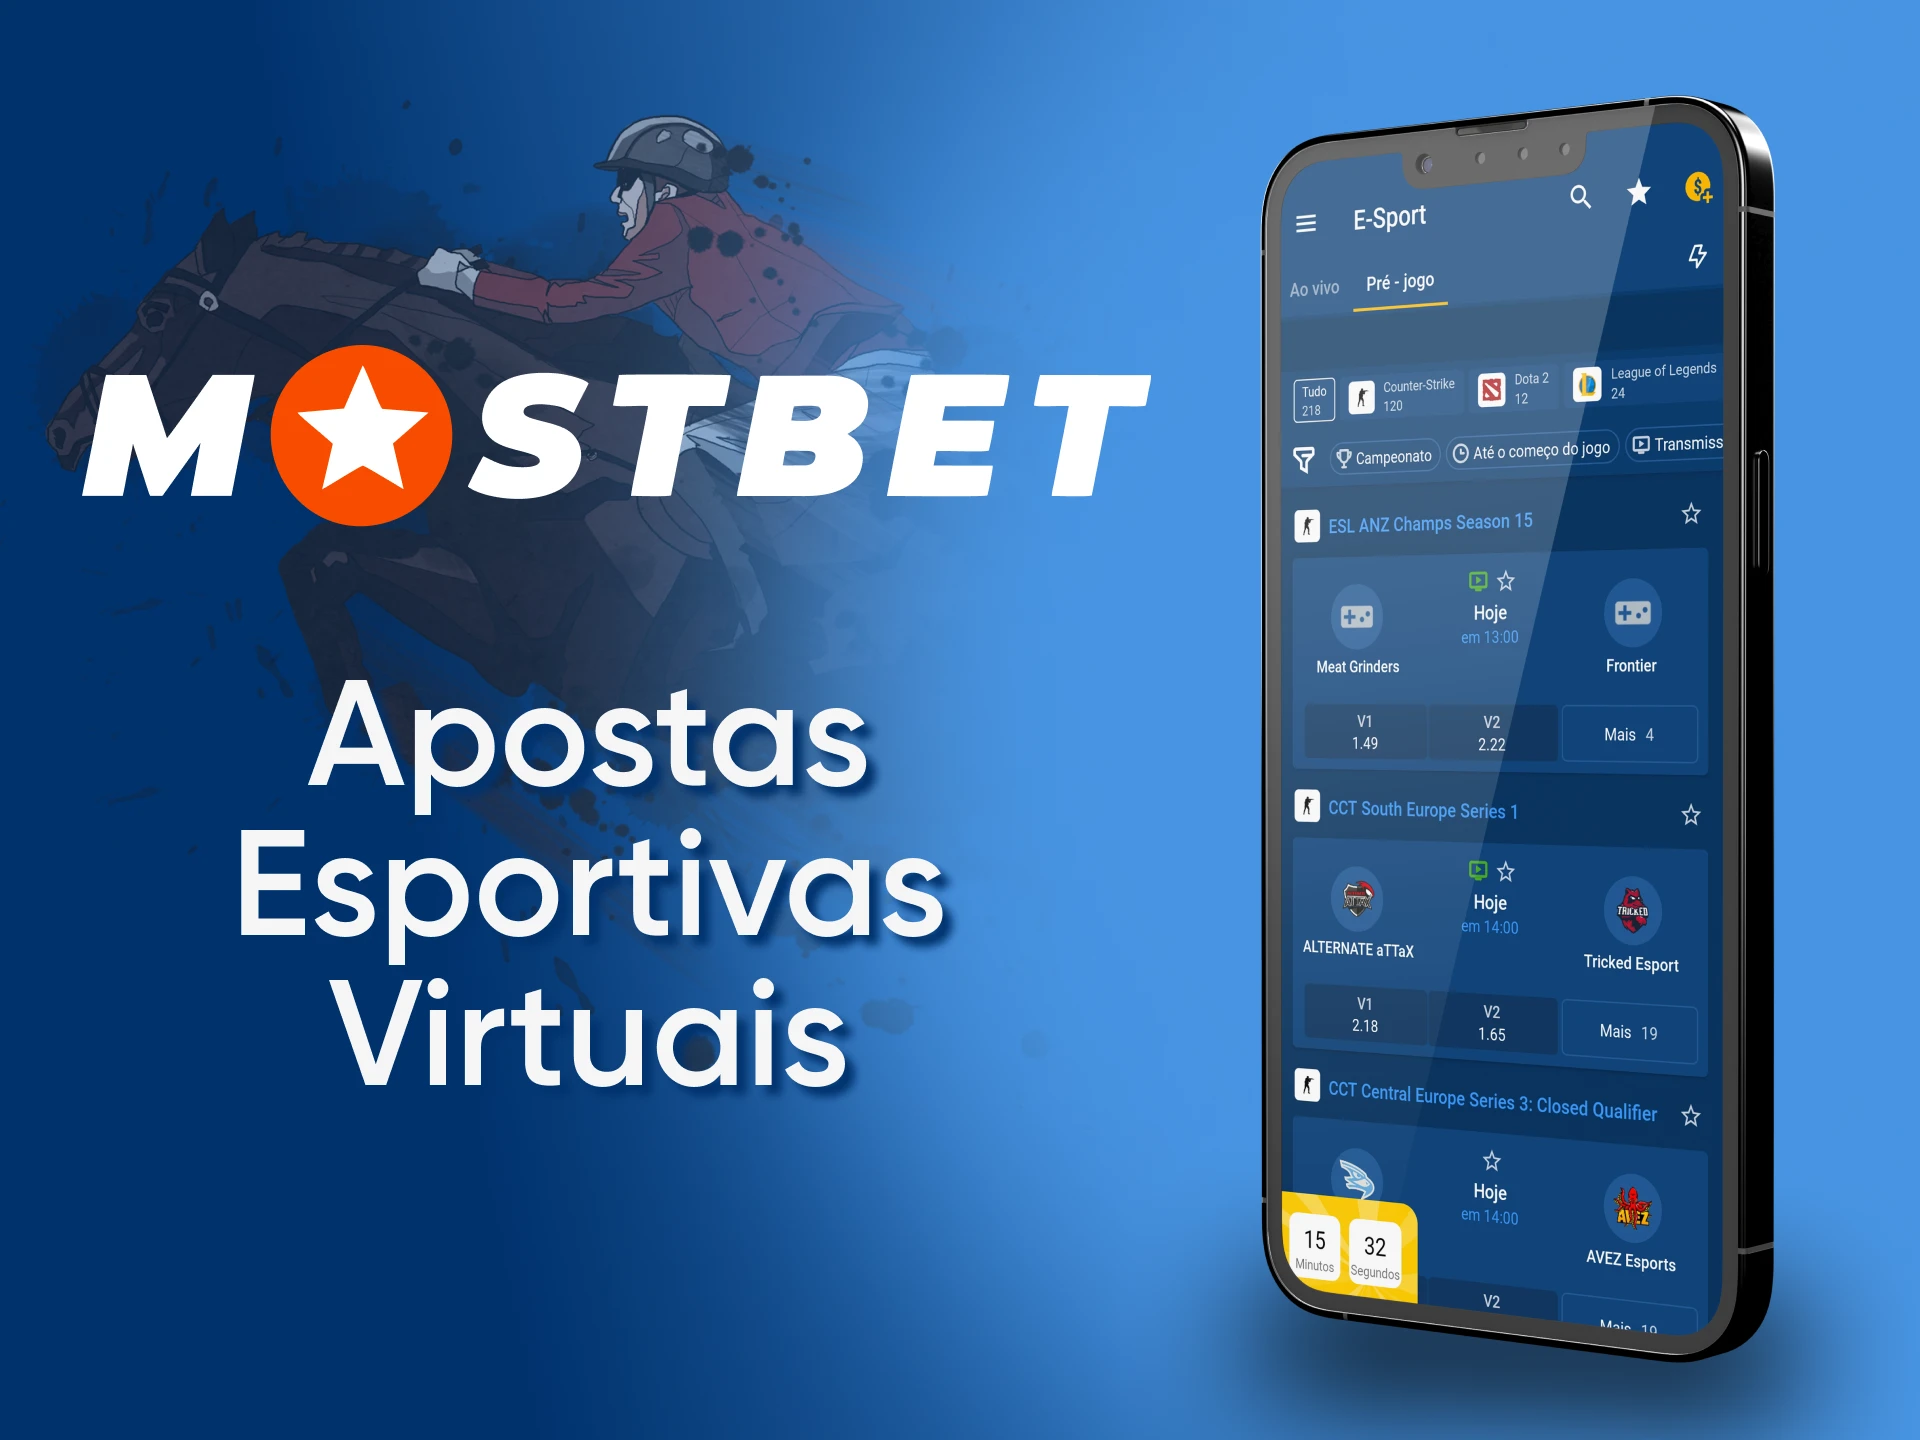 Bet on popular virtual sports on Mostbet.